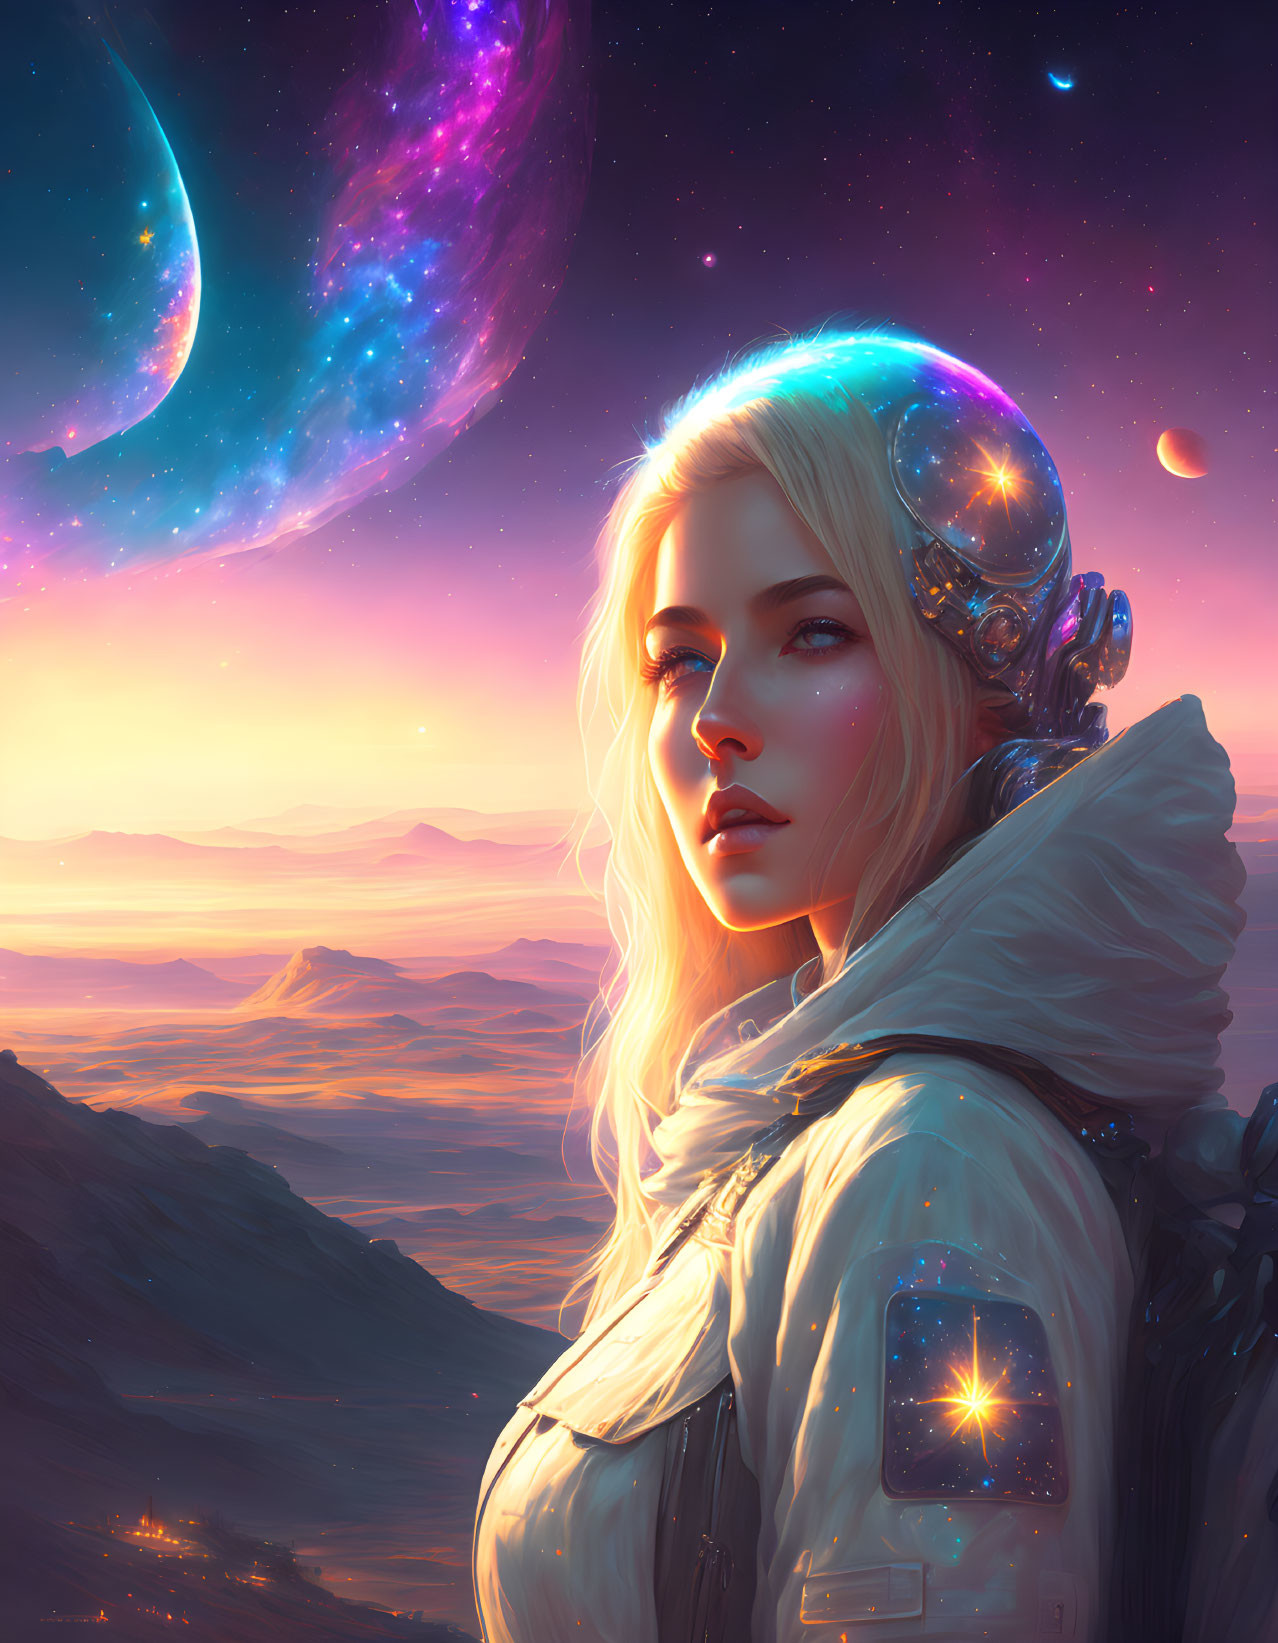 Futuristic woman in space helmet on alien planet with colorful sky